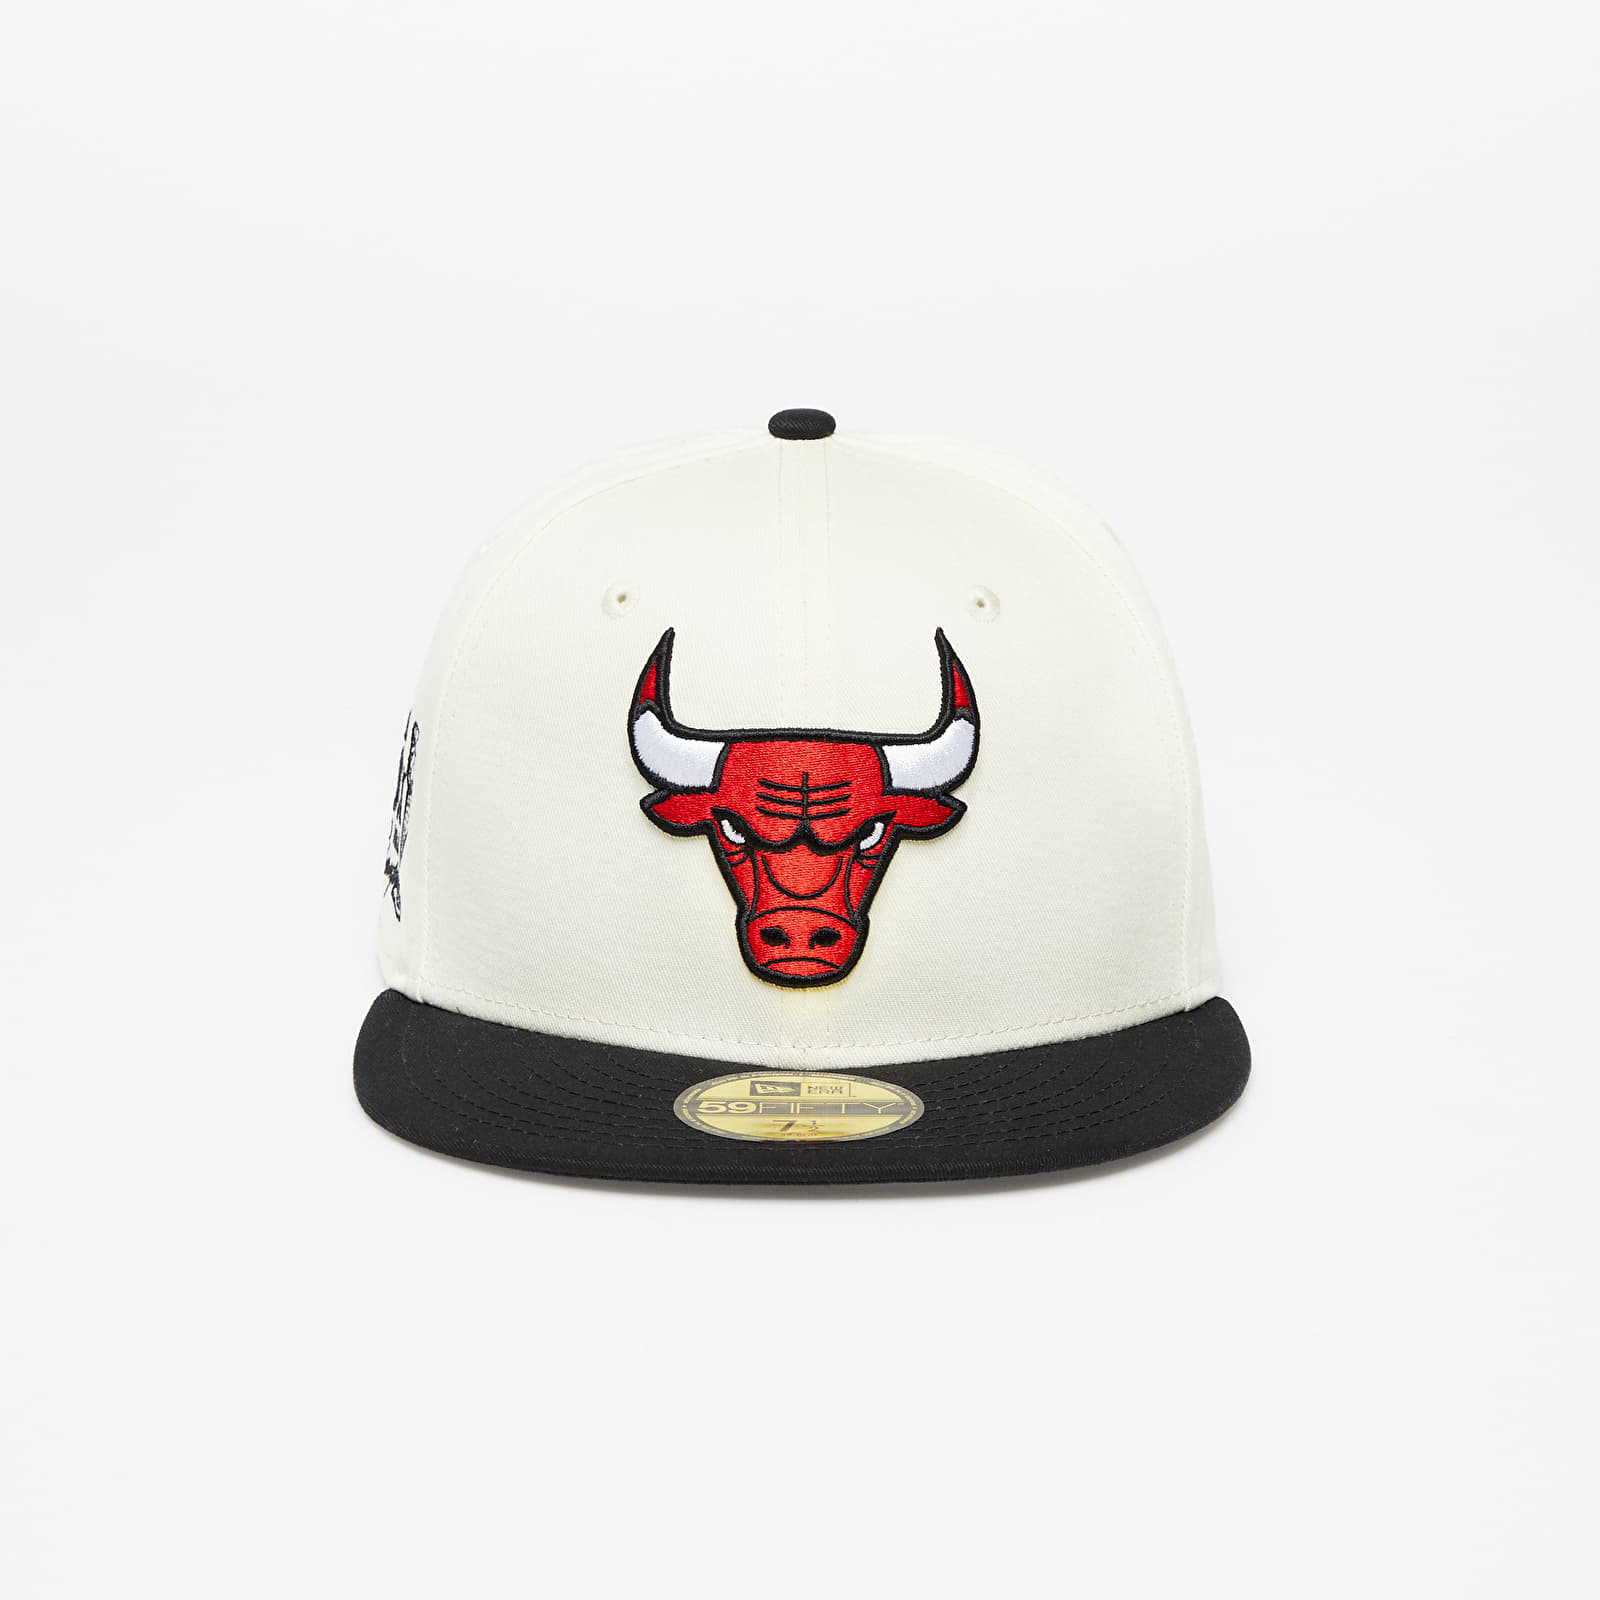 Caps New Era Chicago Bulls Championships 59Fifty Fitted Cap Optic White/ Black